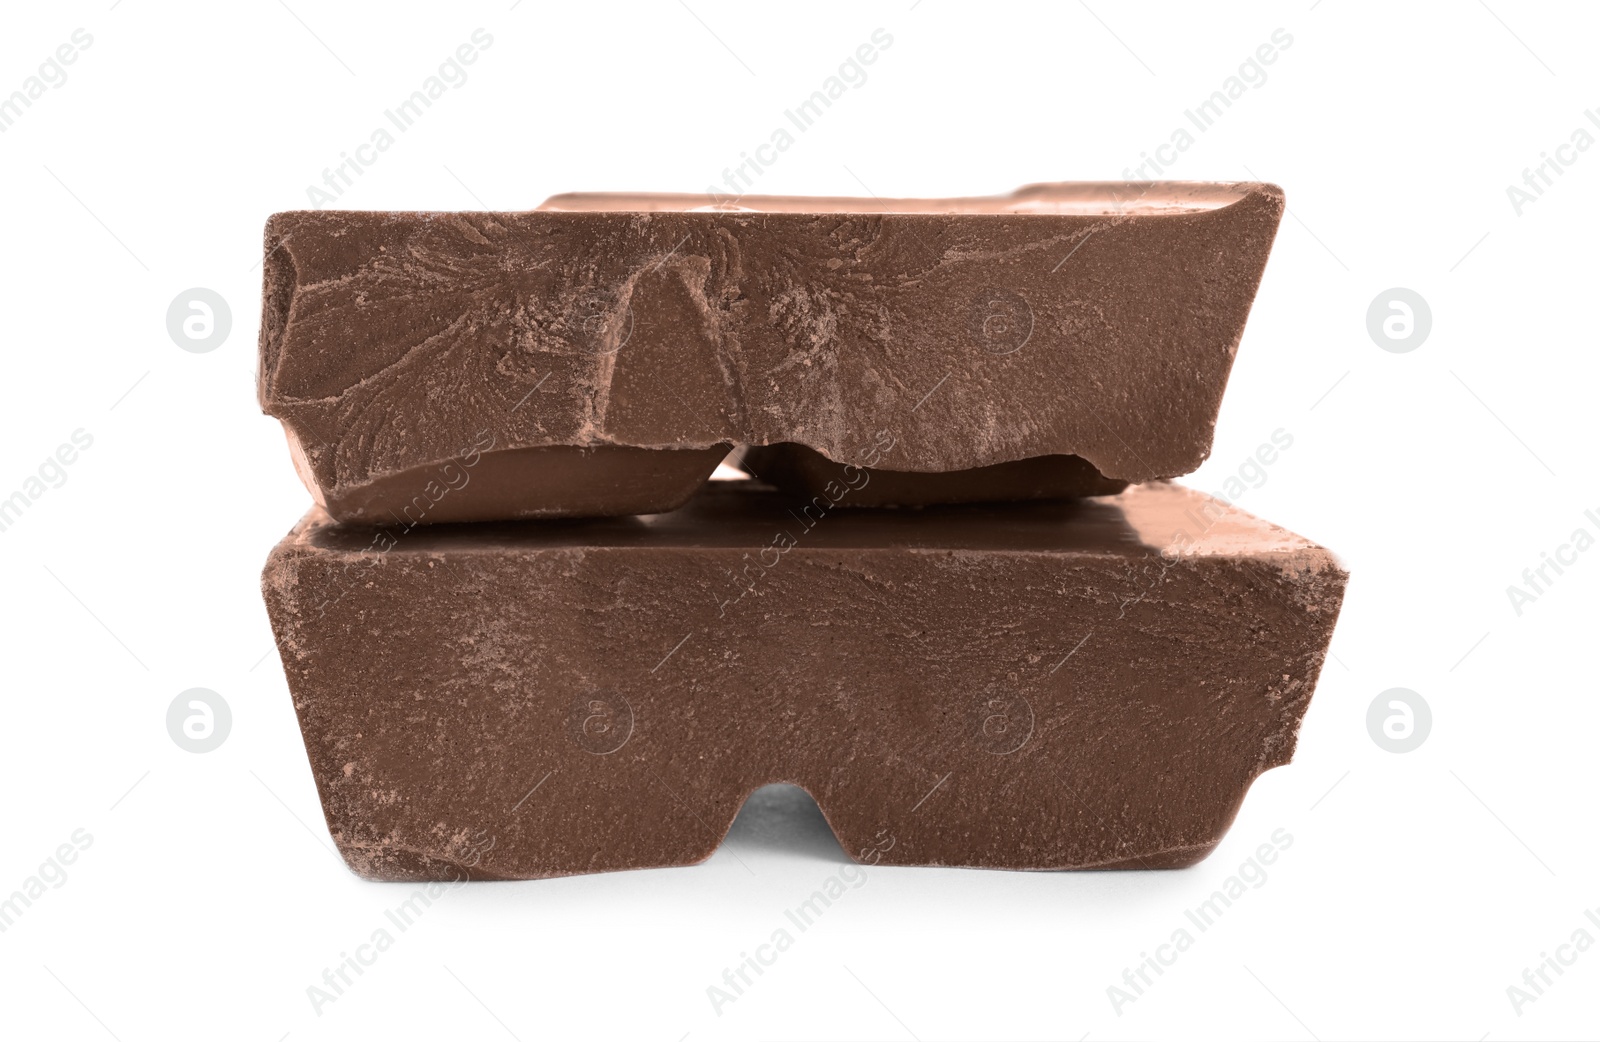 Photo of Pieces of milk chocolate isolated on white